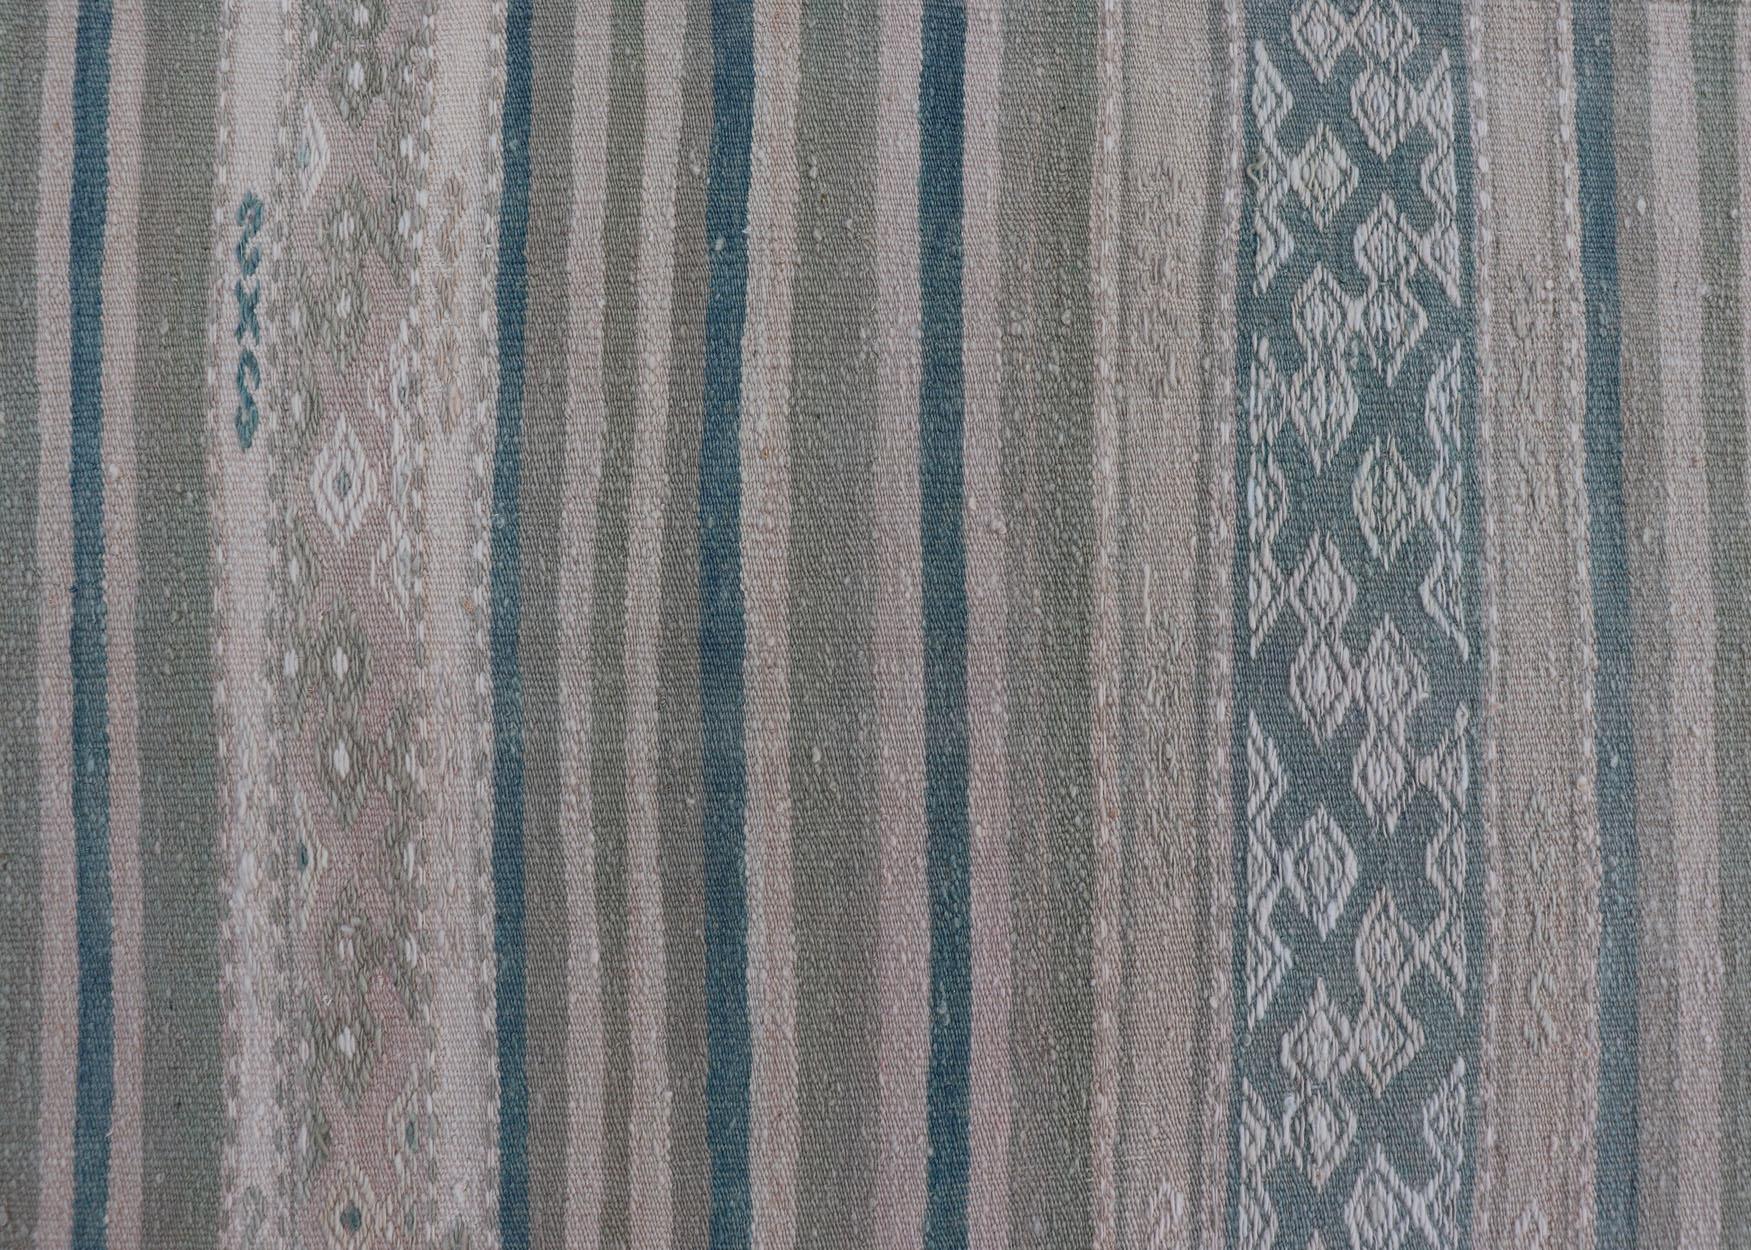 Vintage Flat-Weave Kilim with Embroideries in Blush, Green, Blue and Gray For Sale 2